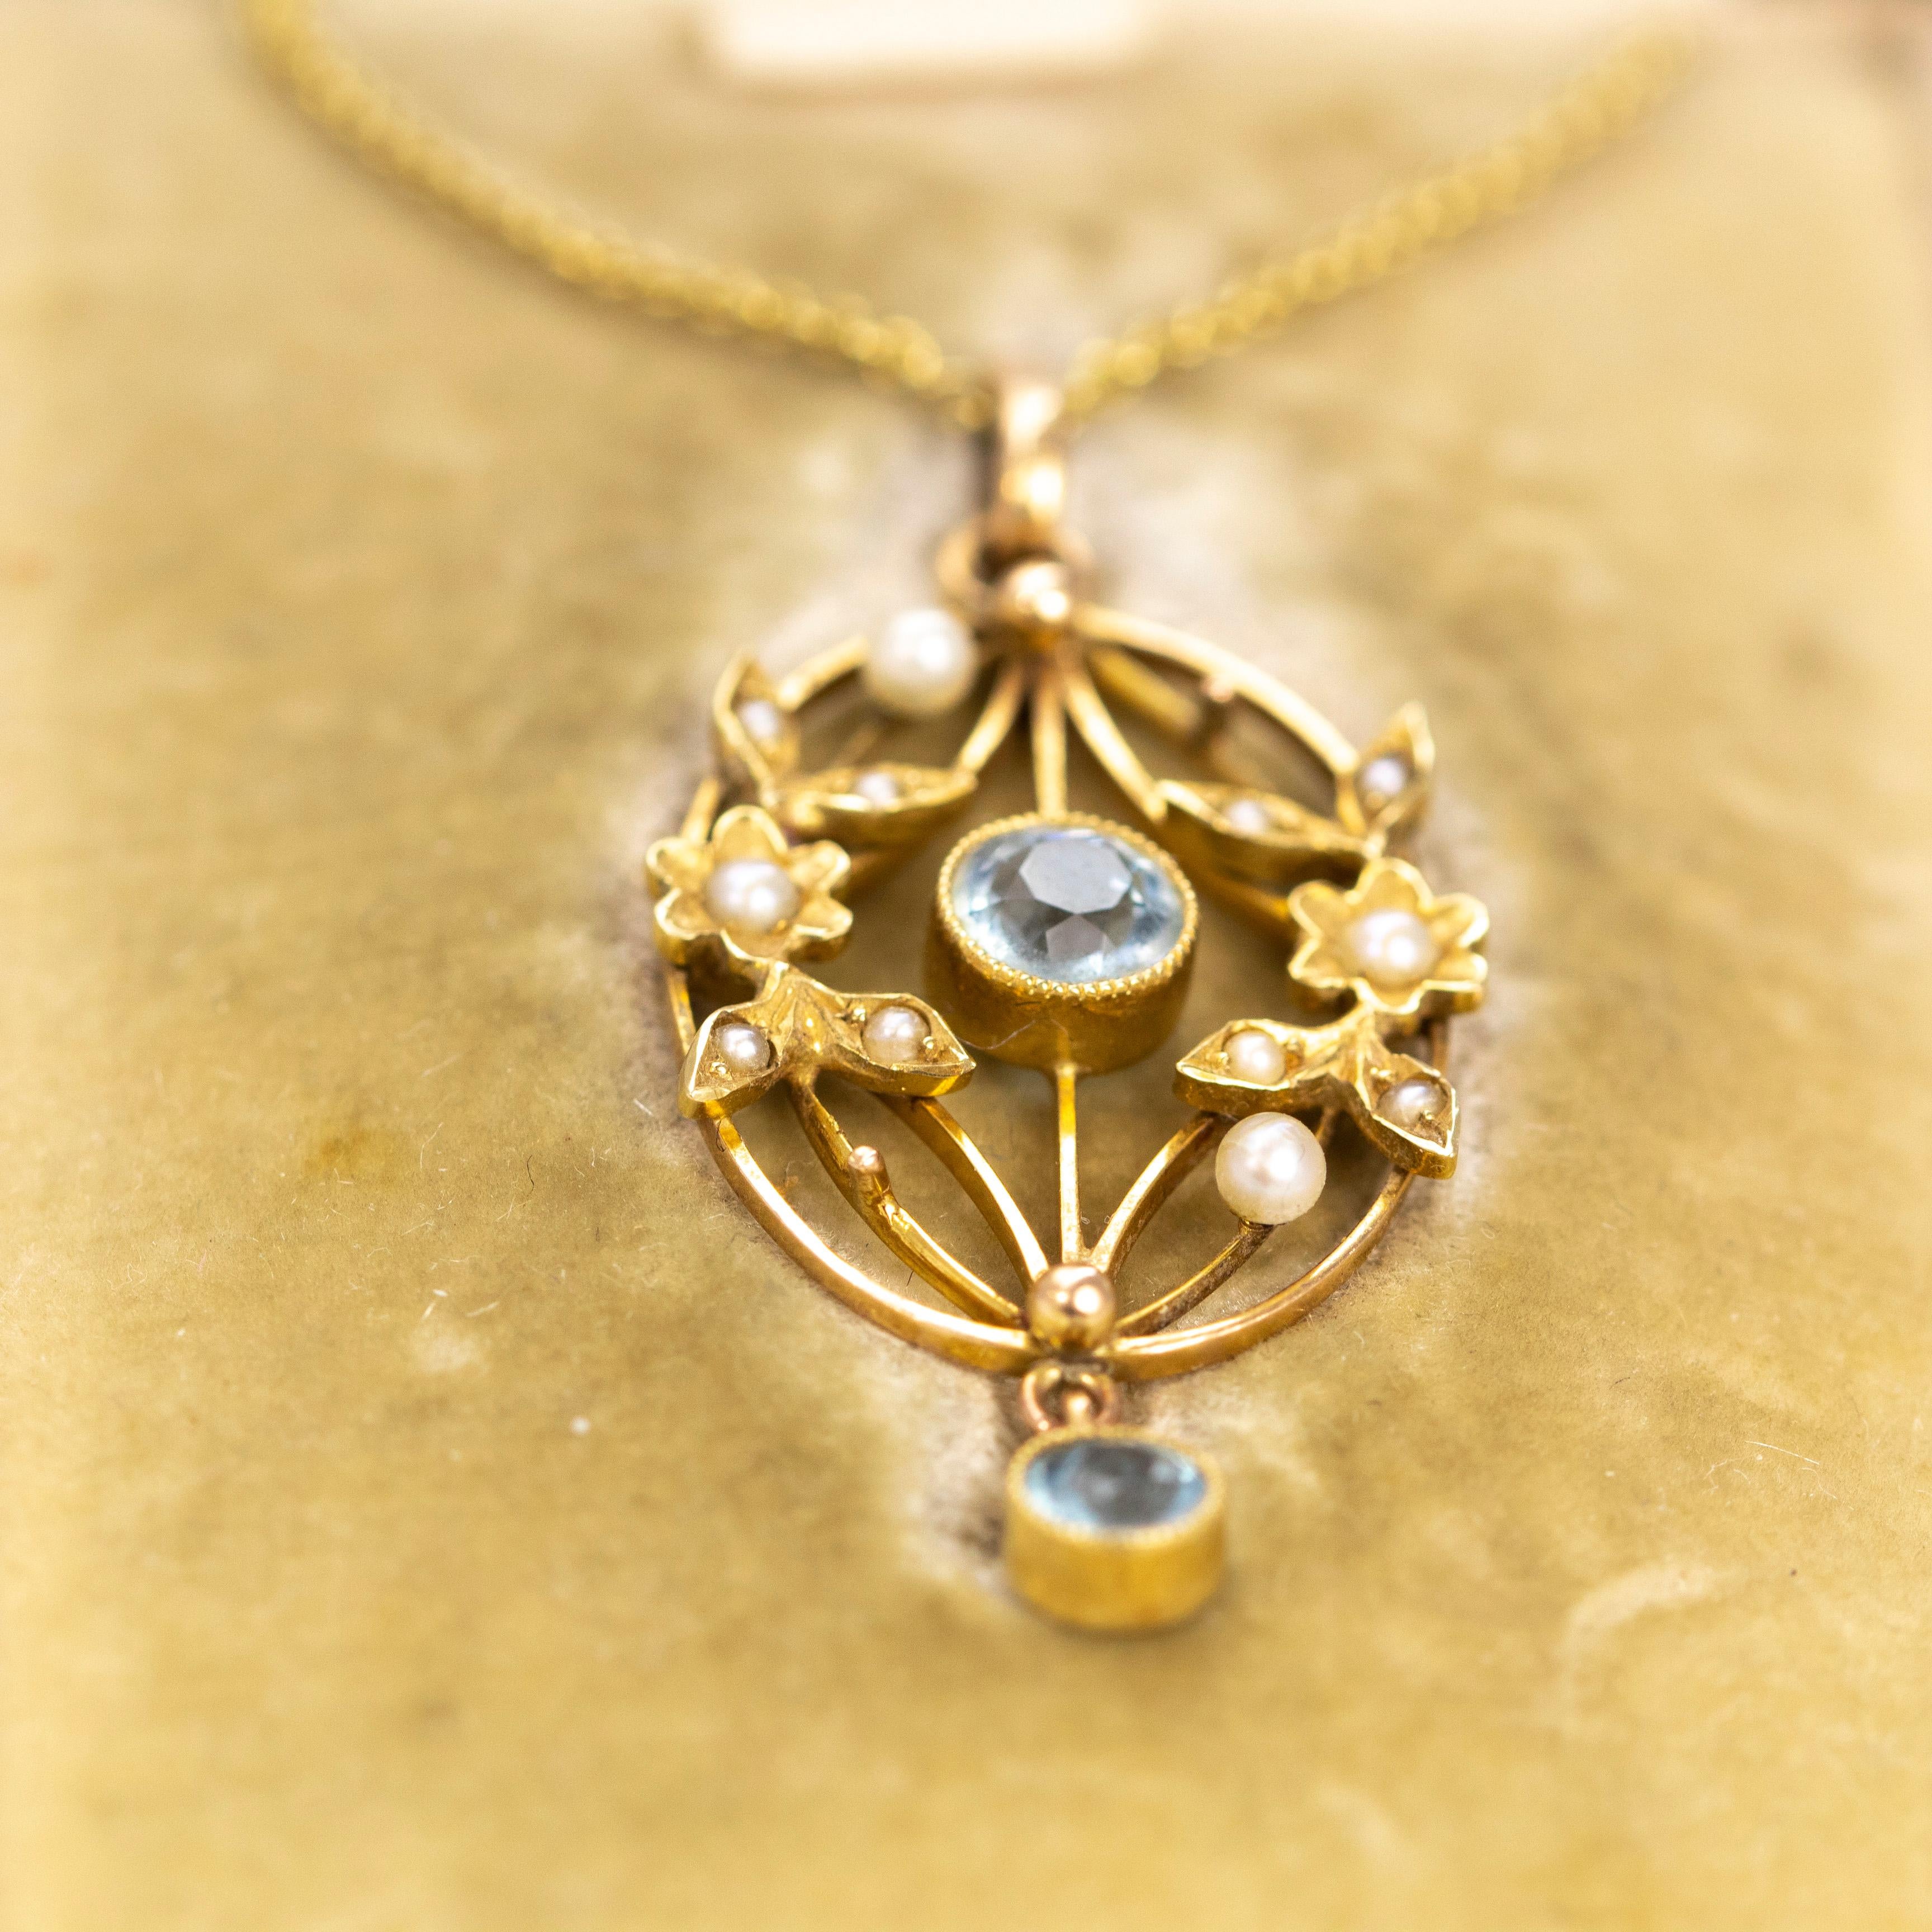 This gorgeous pendant comes in its original fitted box with makes this necklace rather special. This piece was originally retailed by Wilson and Sharp in Edinburgh. The delicate design of this pendant features two aqua stones and holds small and